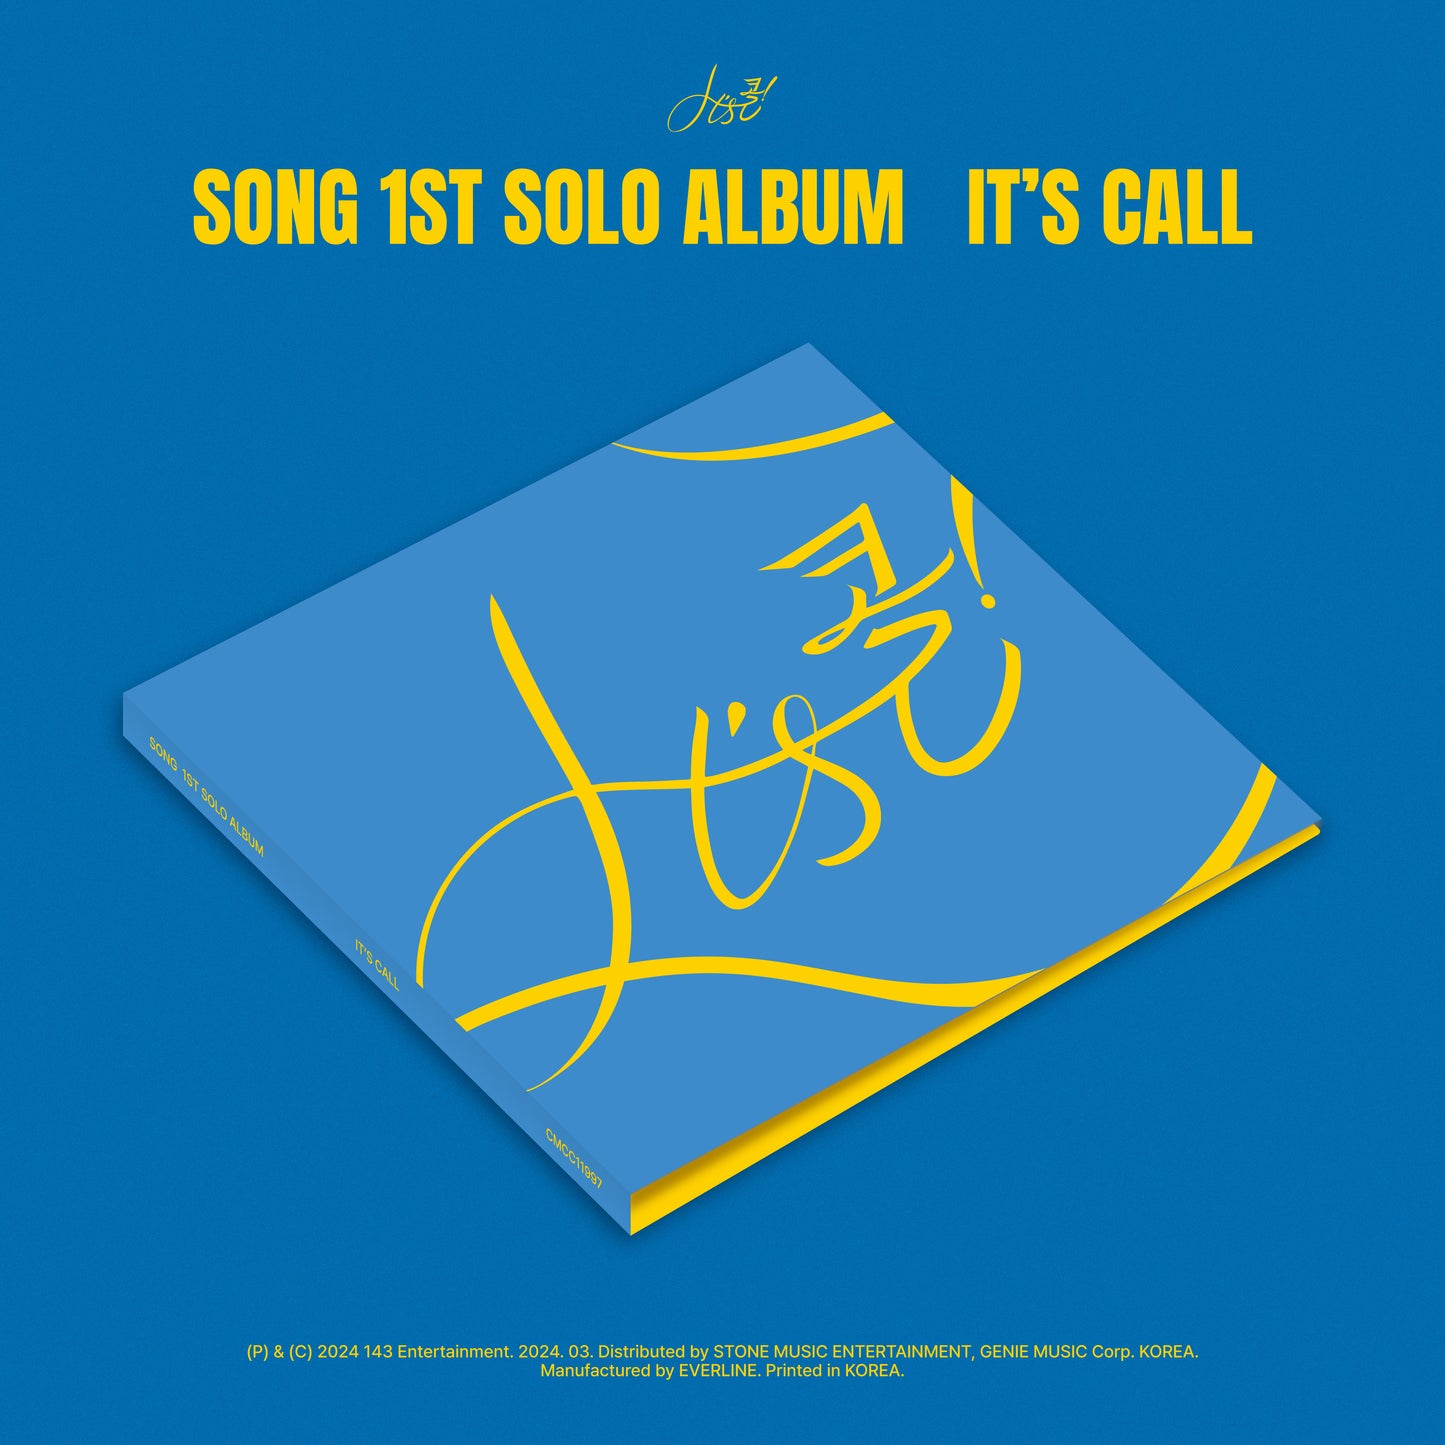 SONG - It's call!